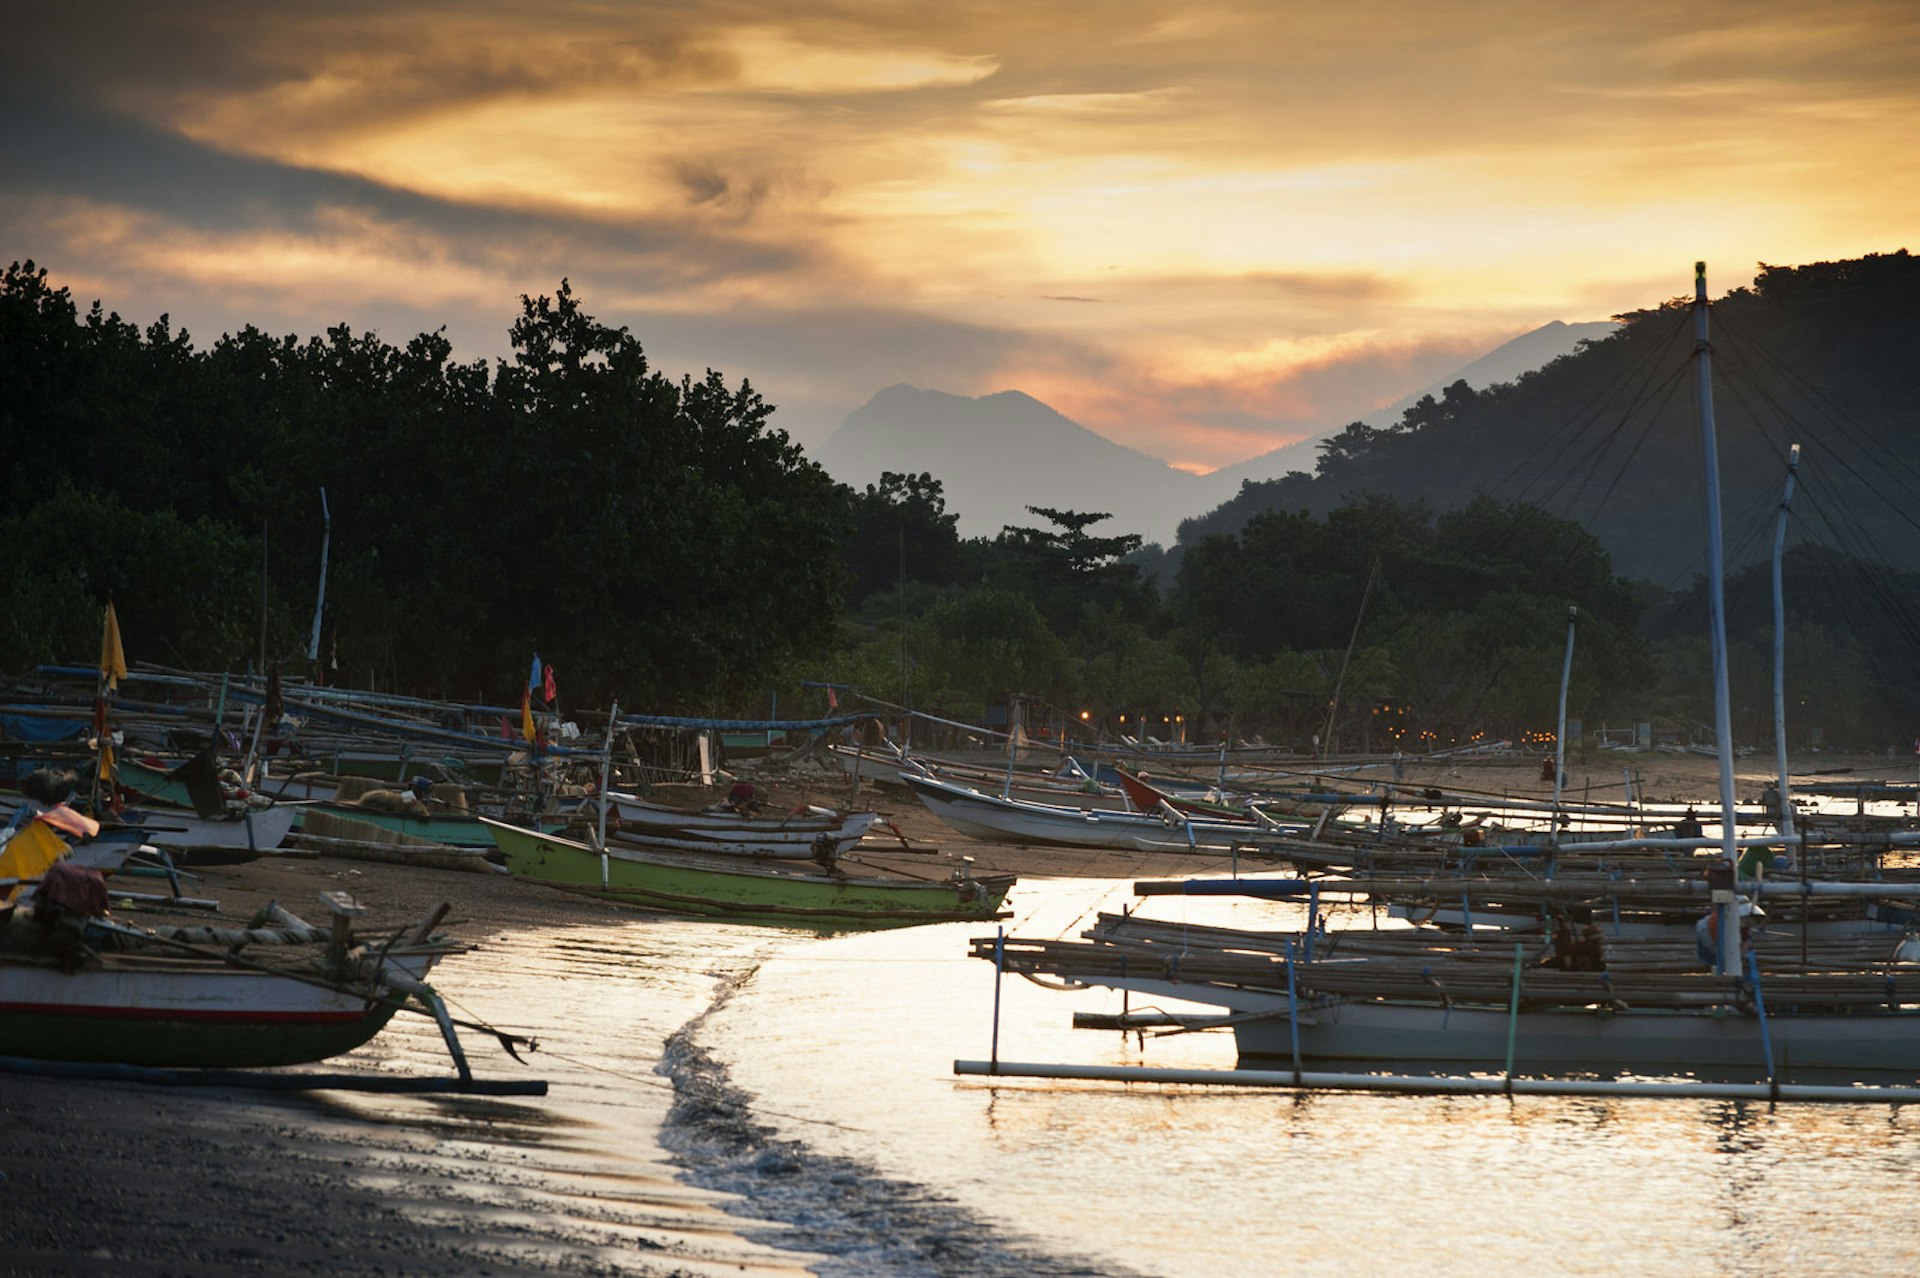 Fishing boats line the shore at Pemuteran © LoweStock / Getty Images